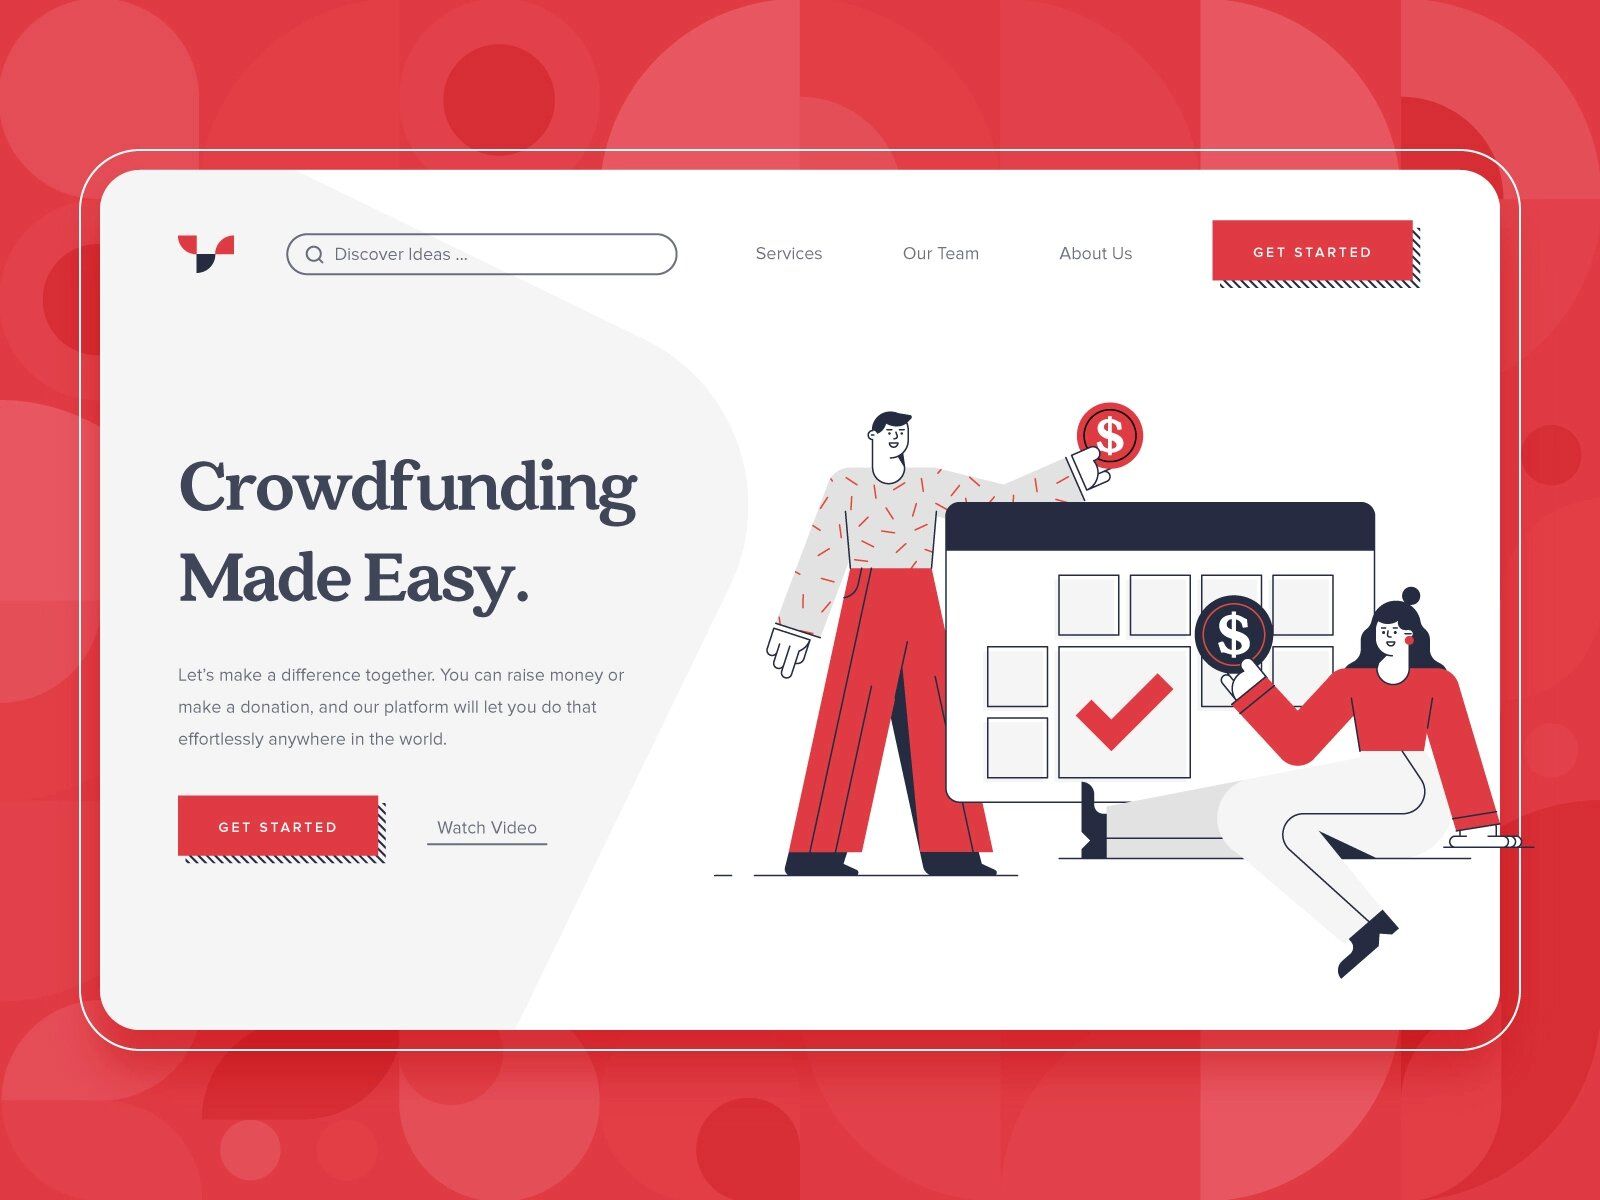 To build a crowdfunding website, you can work with an experienced development team (*image by [Samuel Oktavianus](https://dribbble.com/samoctav){ rel="nofollow" target="_blank" .default-md}*)